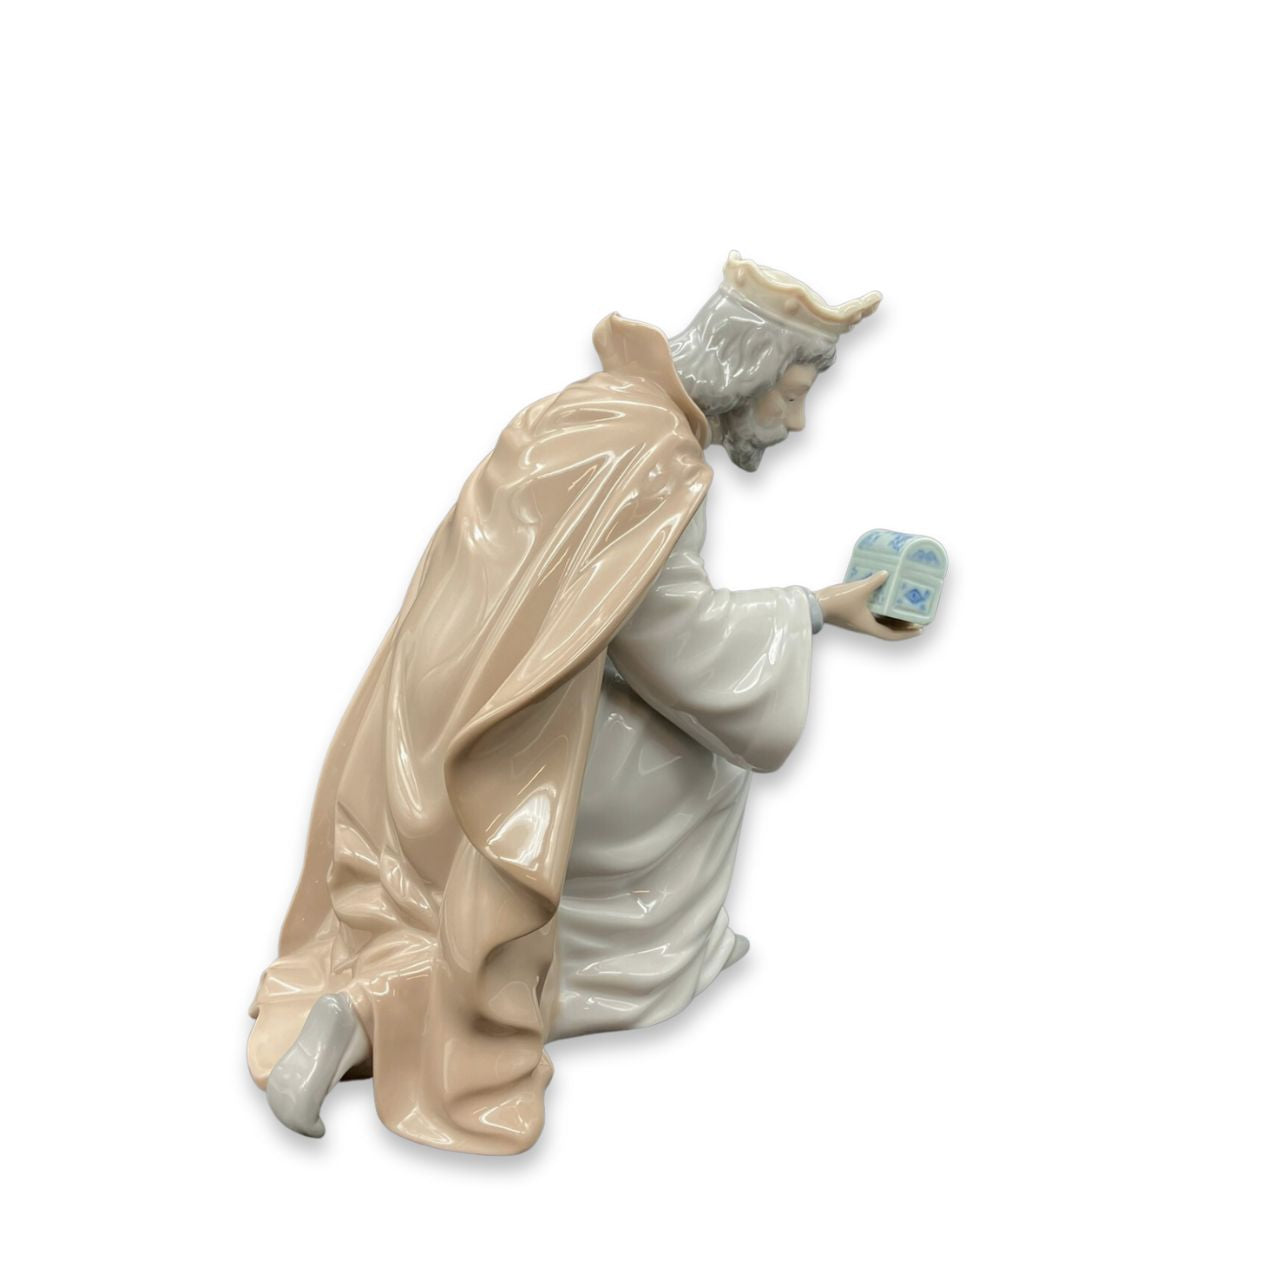 Nao by Lladro King Melchior With Chest Wisemen  Nao porcelain figurine “King Melchior With Chest” from the Christmas Collection.  Sculpted by Regino Torrijos, this figurine is part of the nativity set.